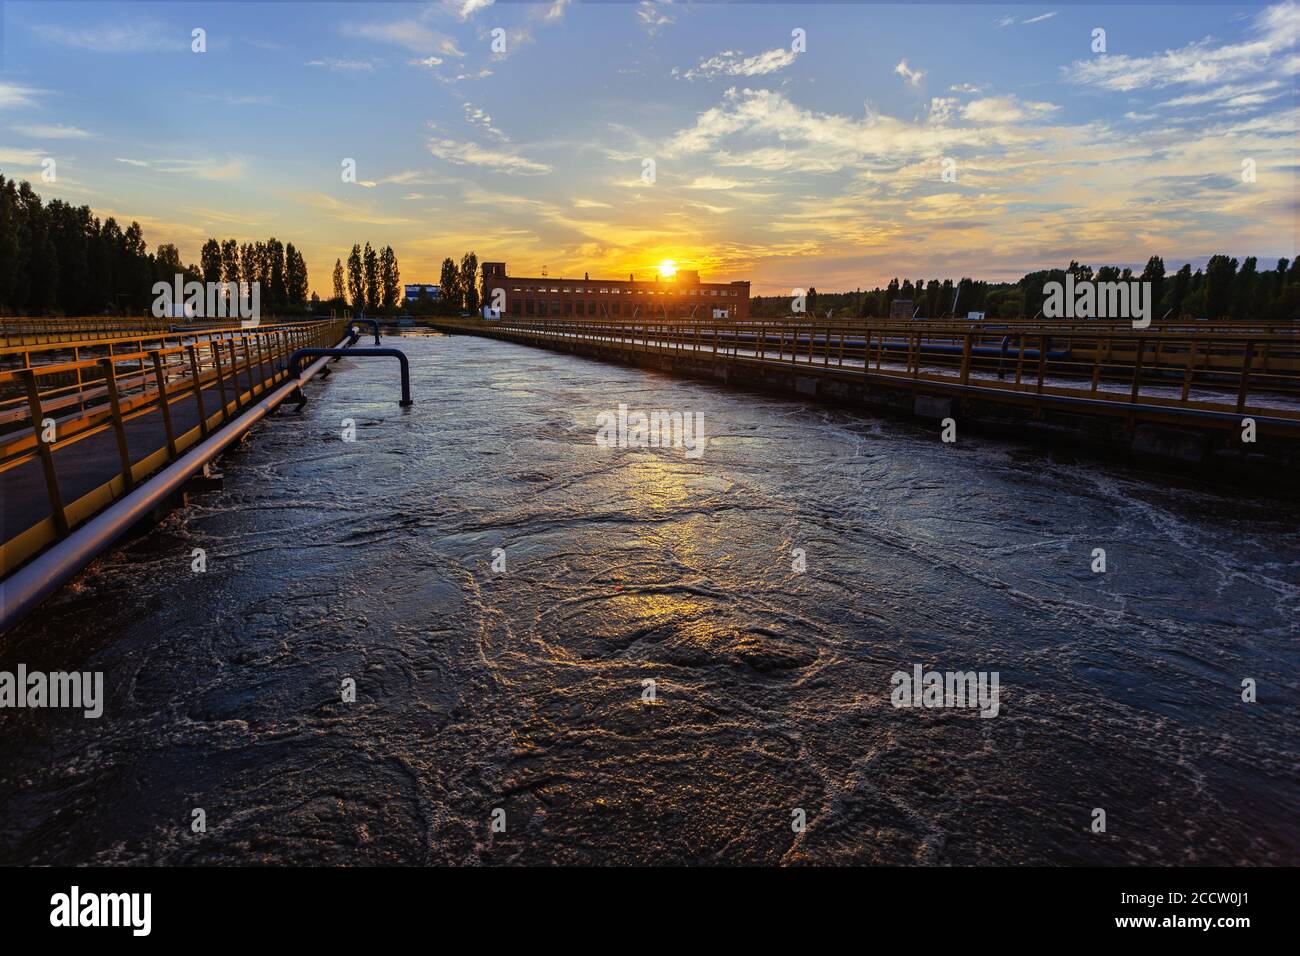 Modern wastewater treatment plant. Tanks for aeration and biological purification of sewage at sunset Stock Photo